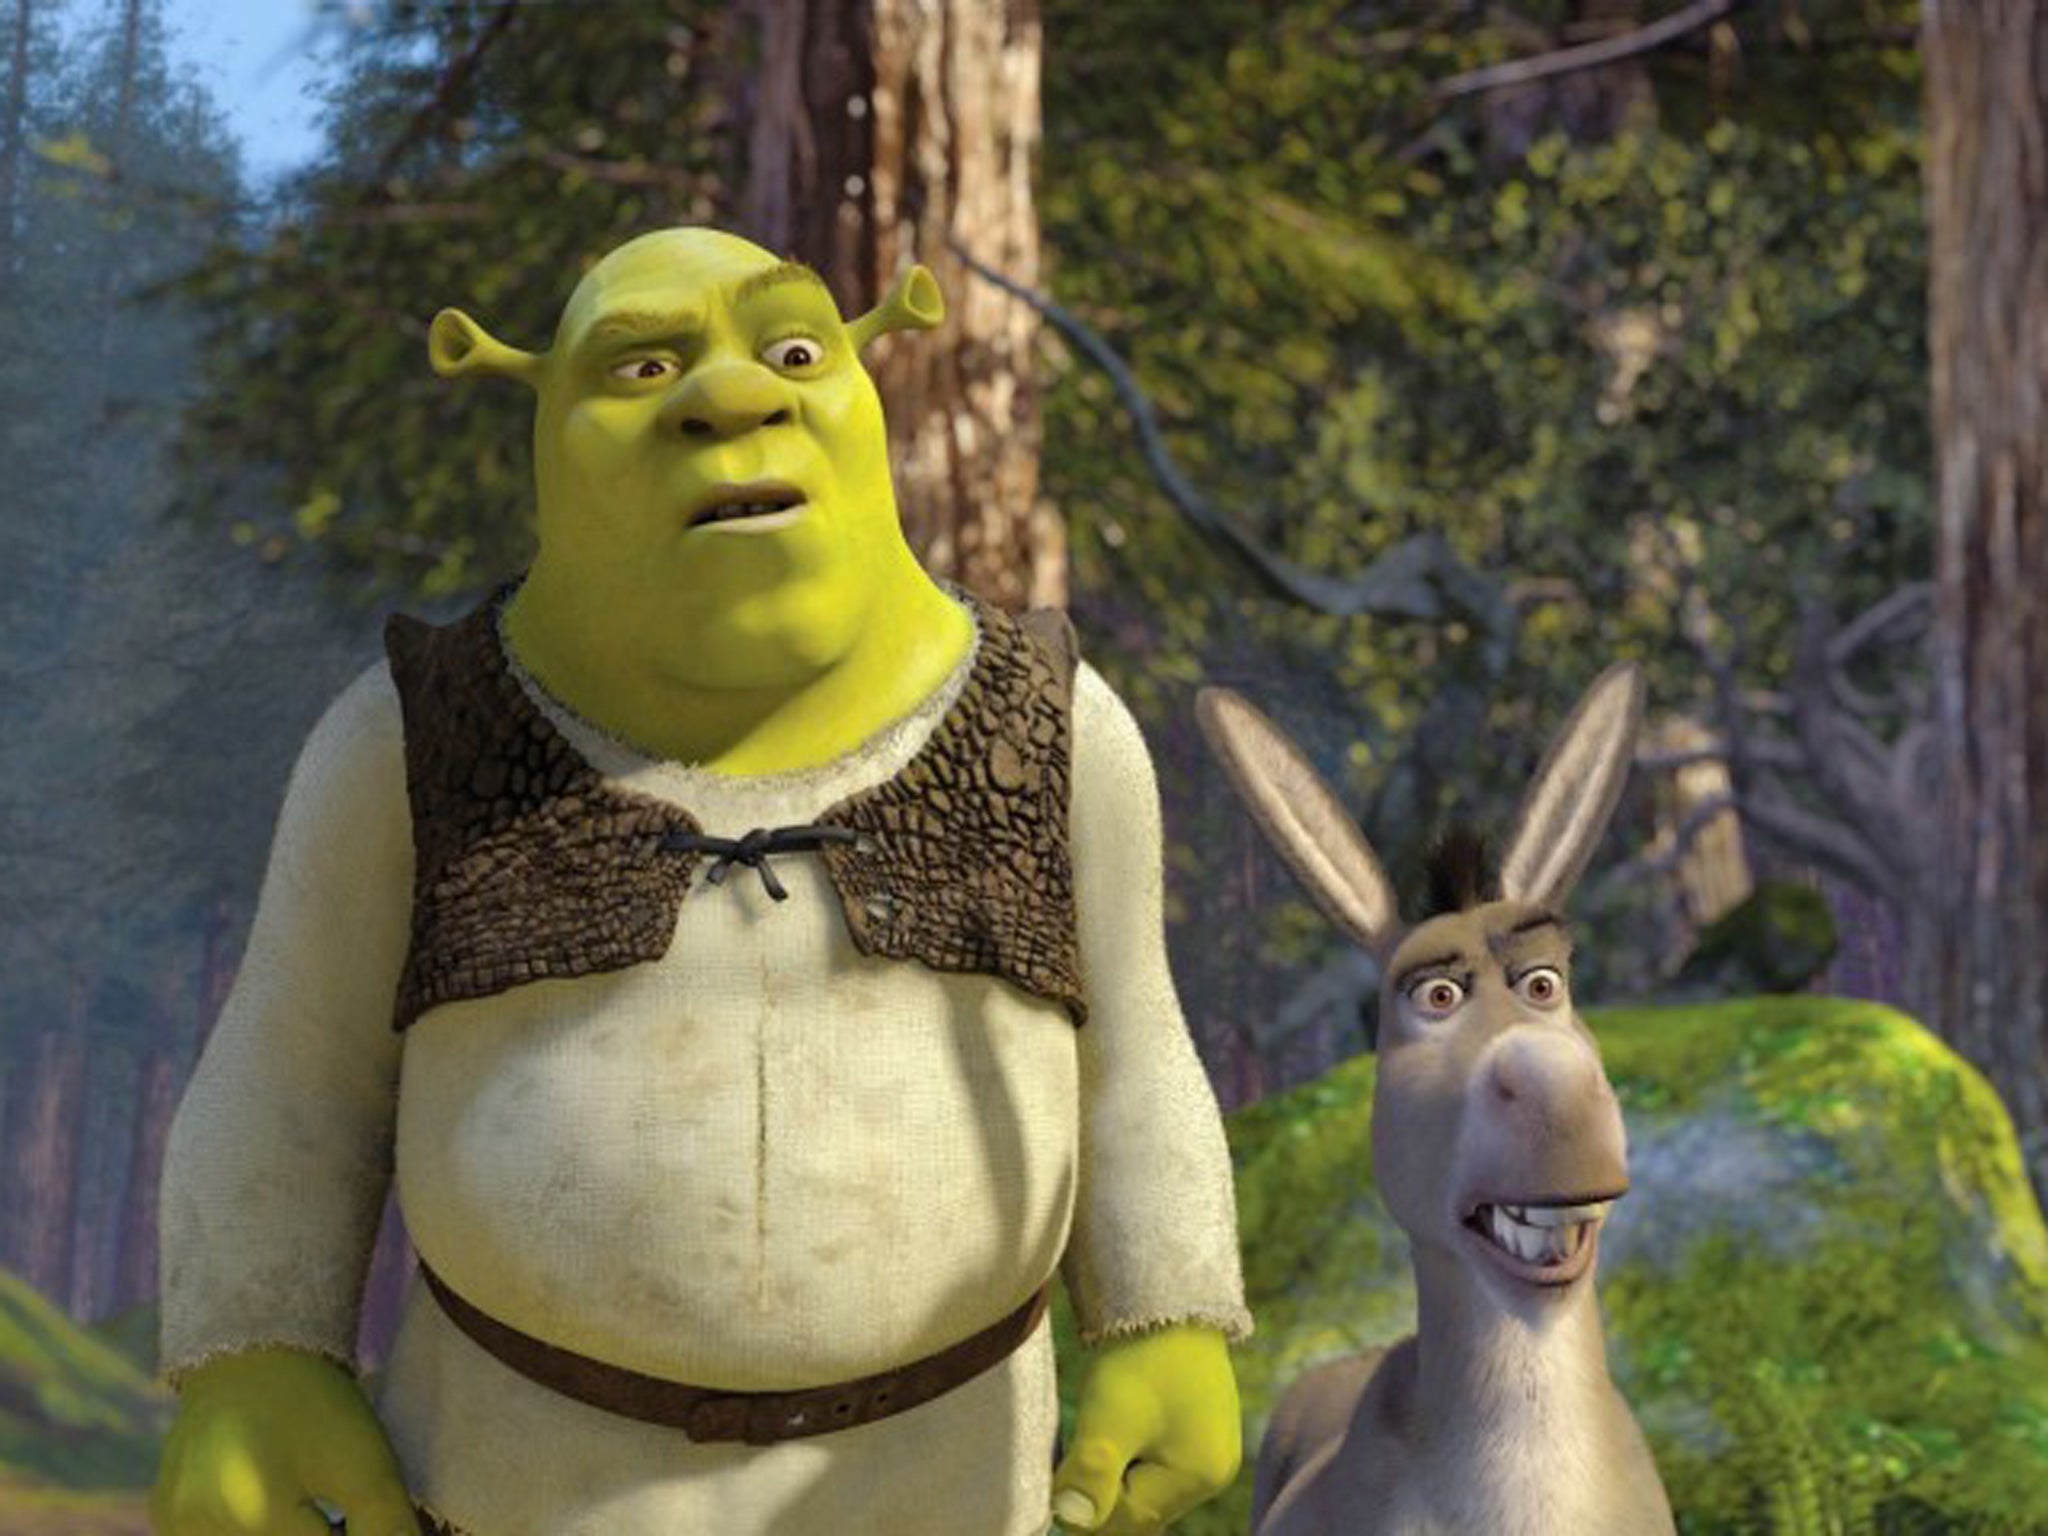 Powell also worked on the Shrek series